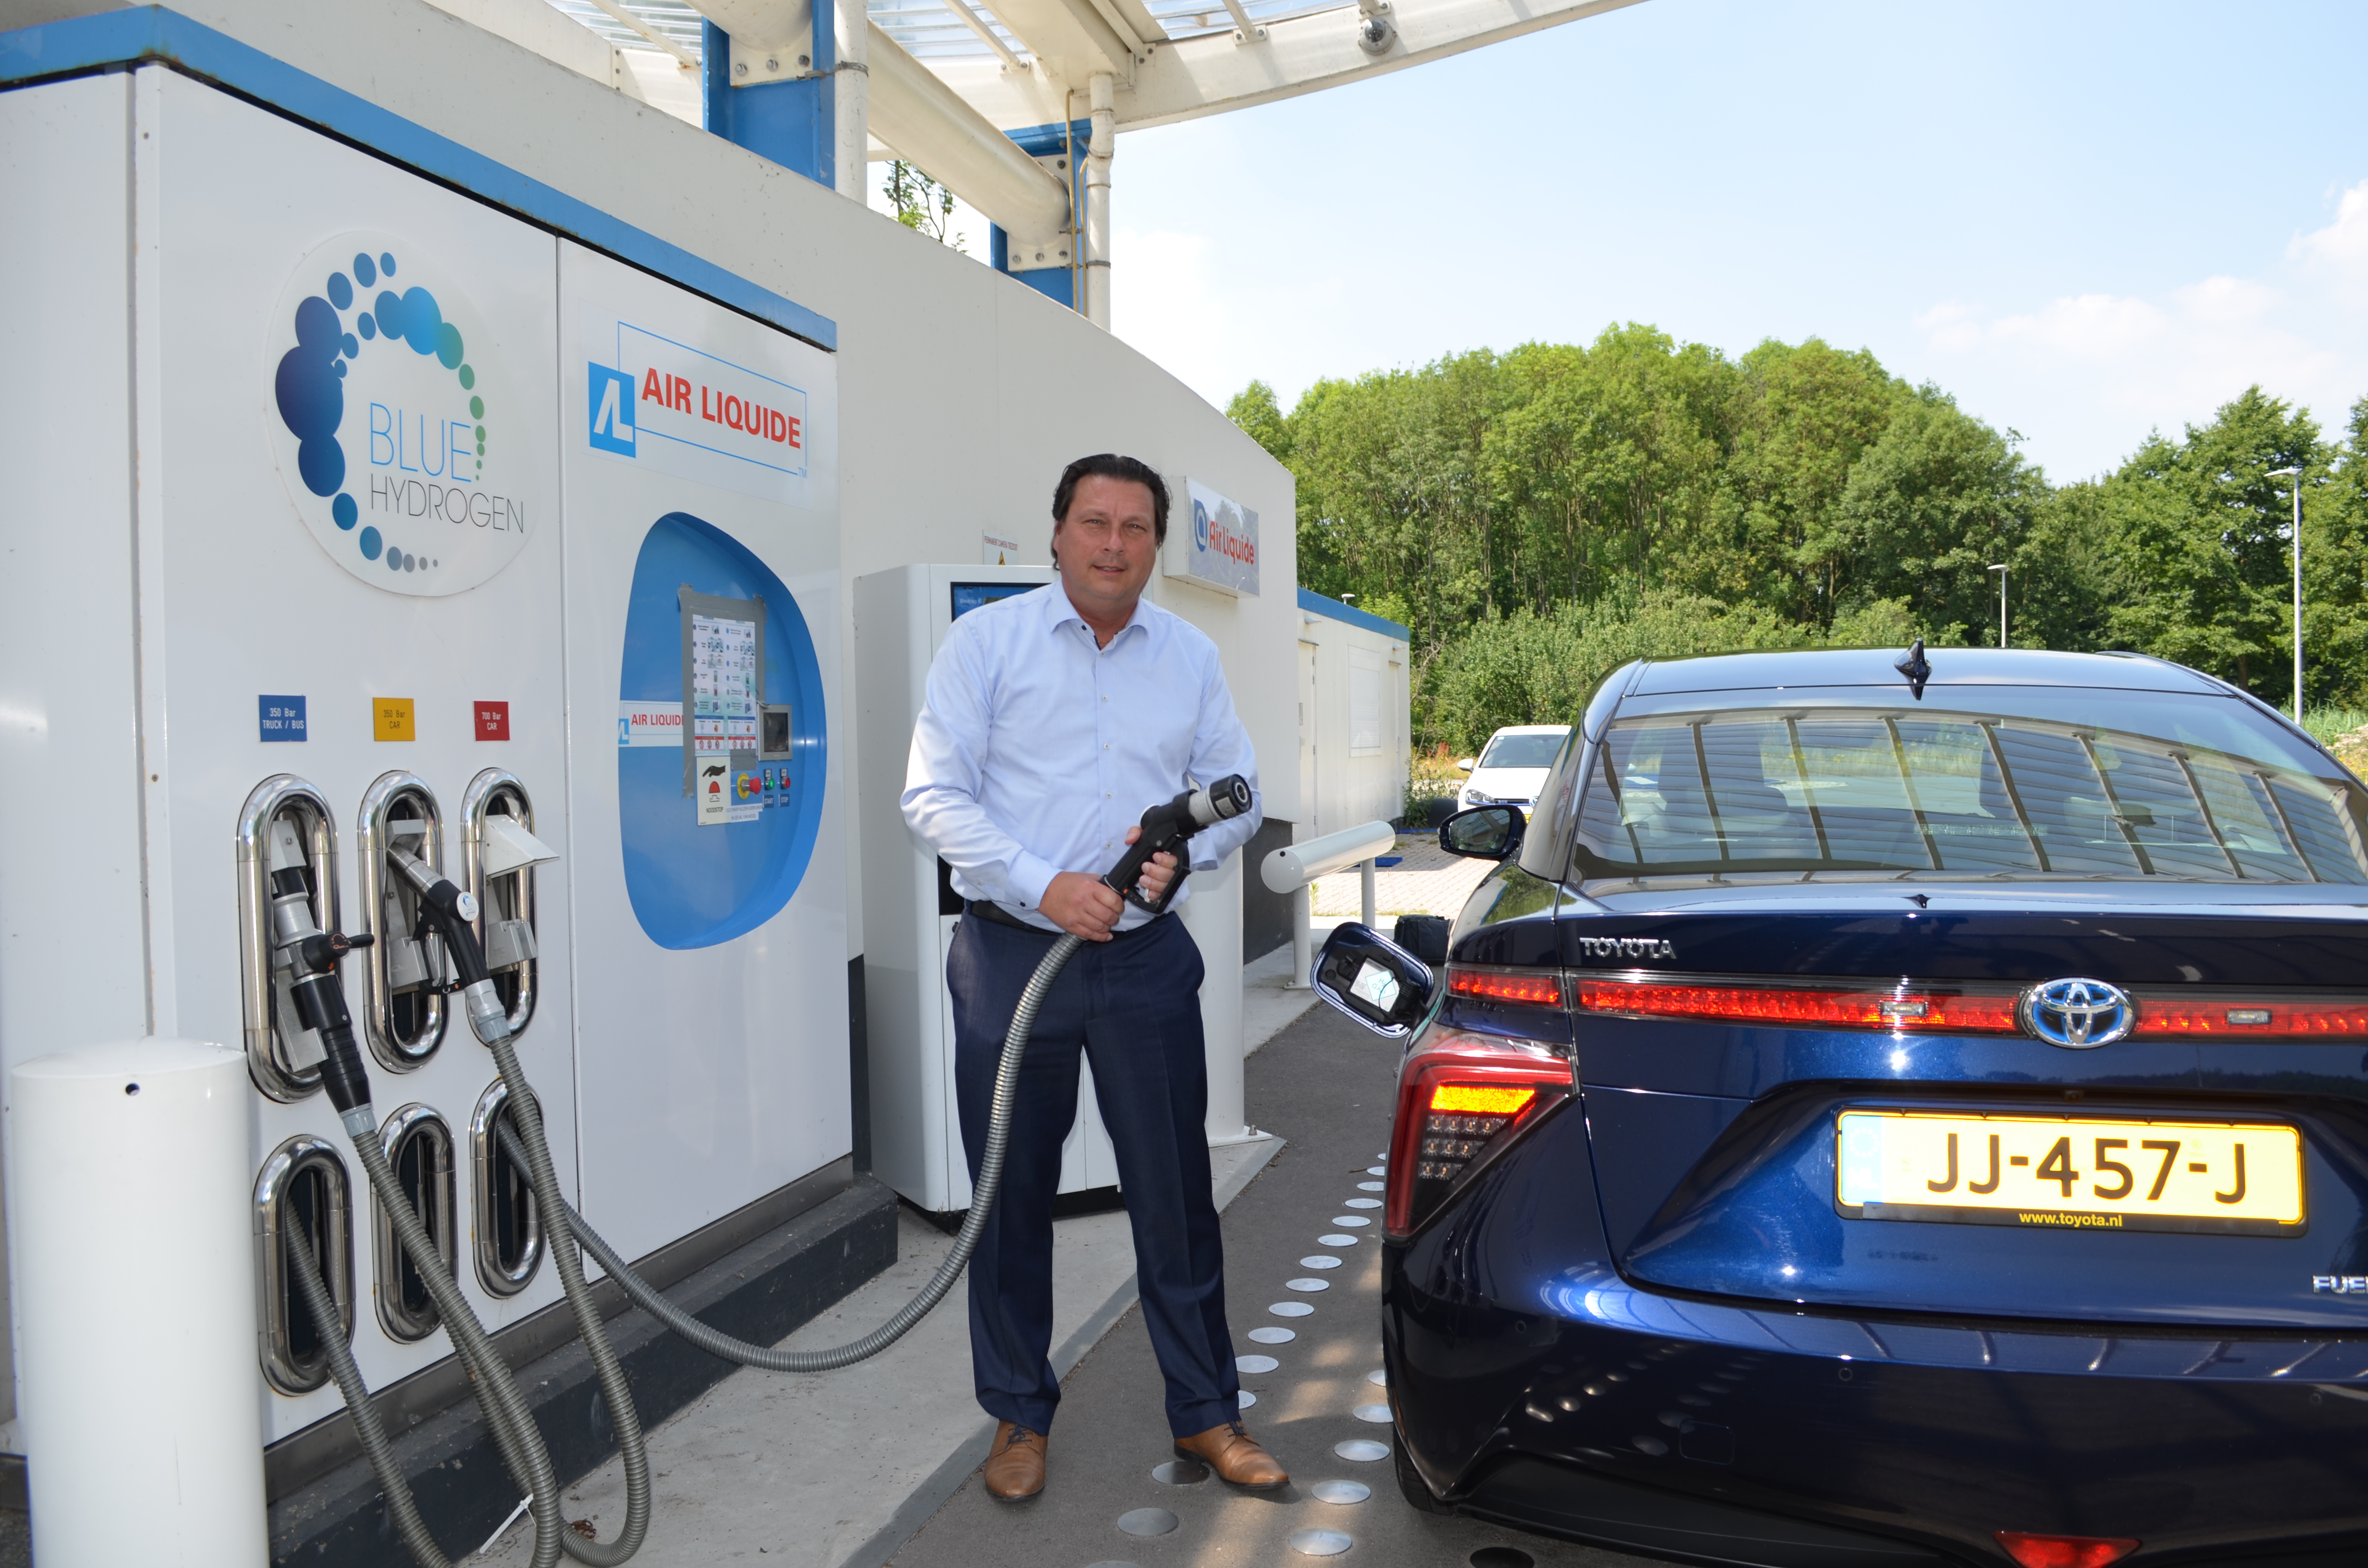 The hydrogen fueling station in Rhoon, with refill guns, hoses and break away couplings from Teesing.